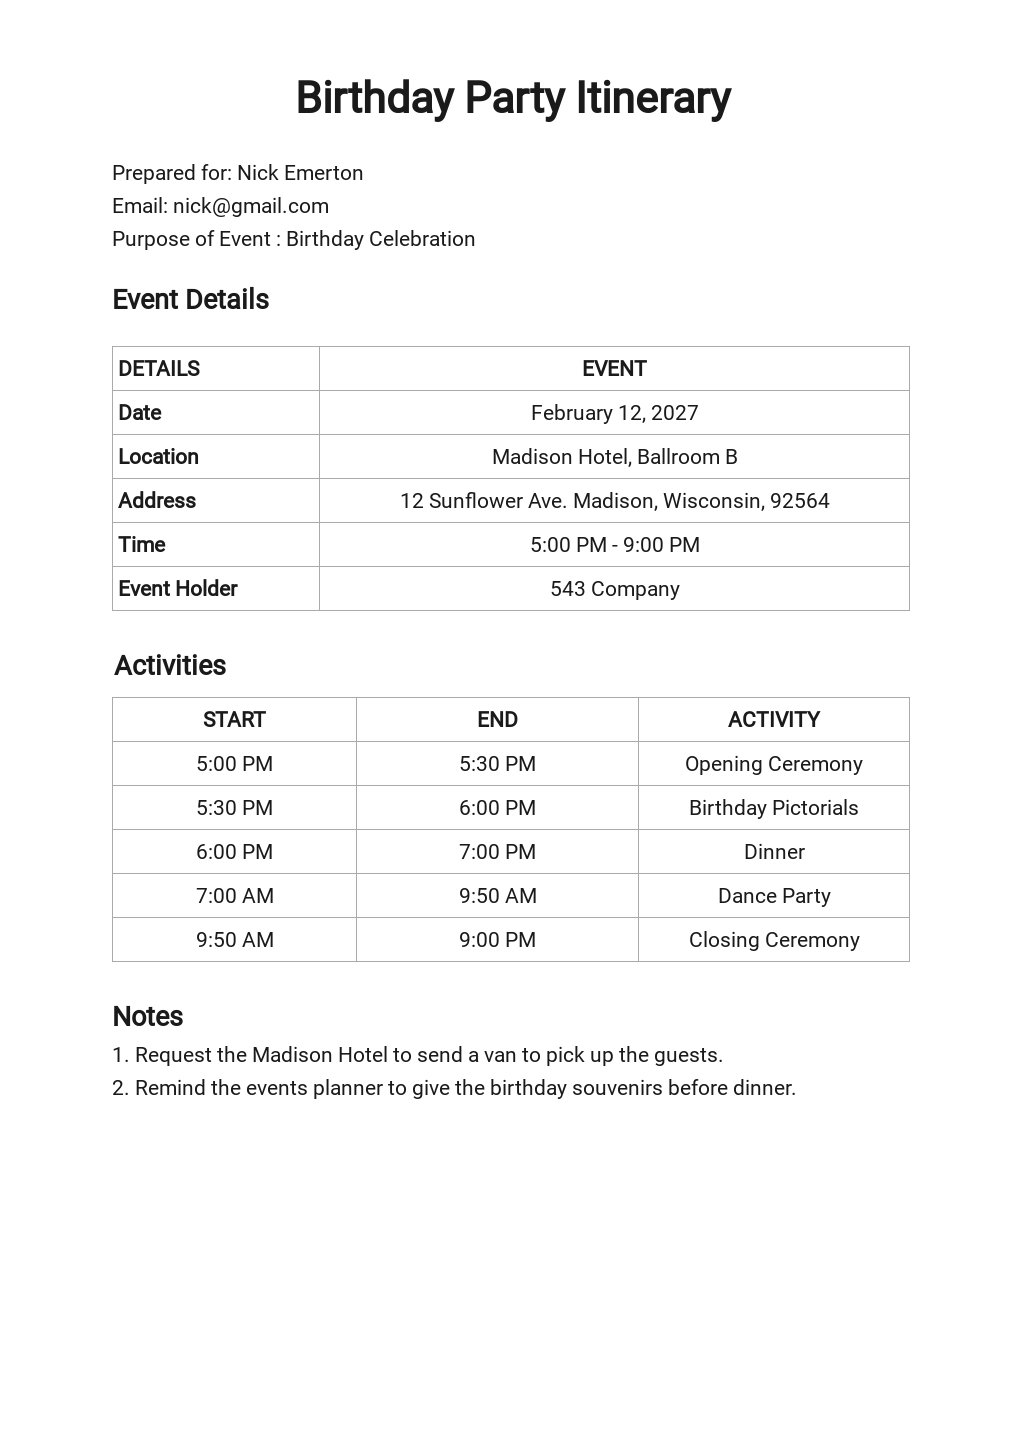 21+ Party Itinerary Templates - Free Downloads  Template.net Regarding Party Agenda Template